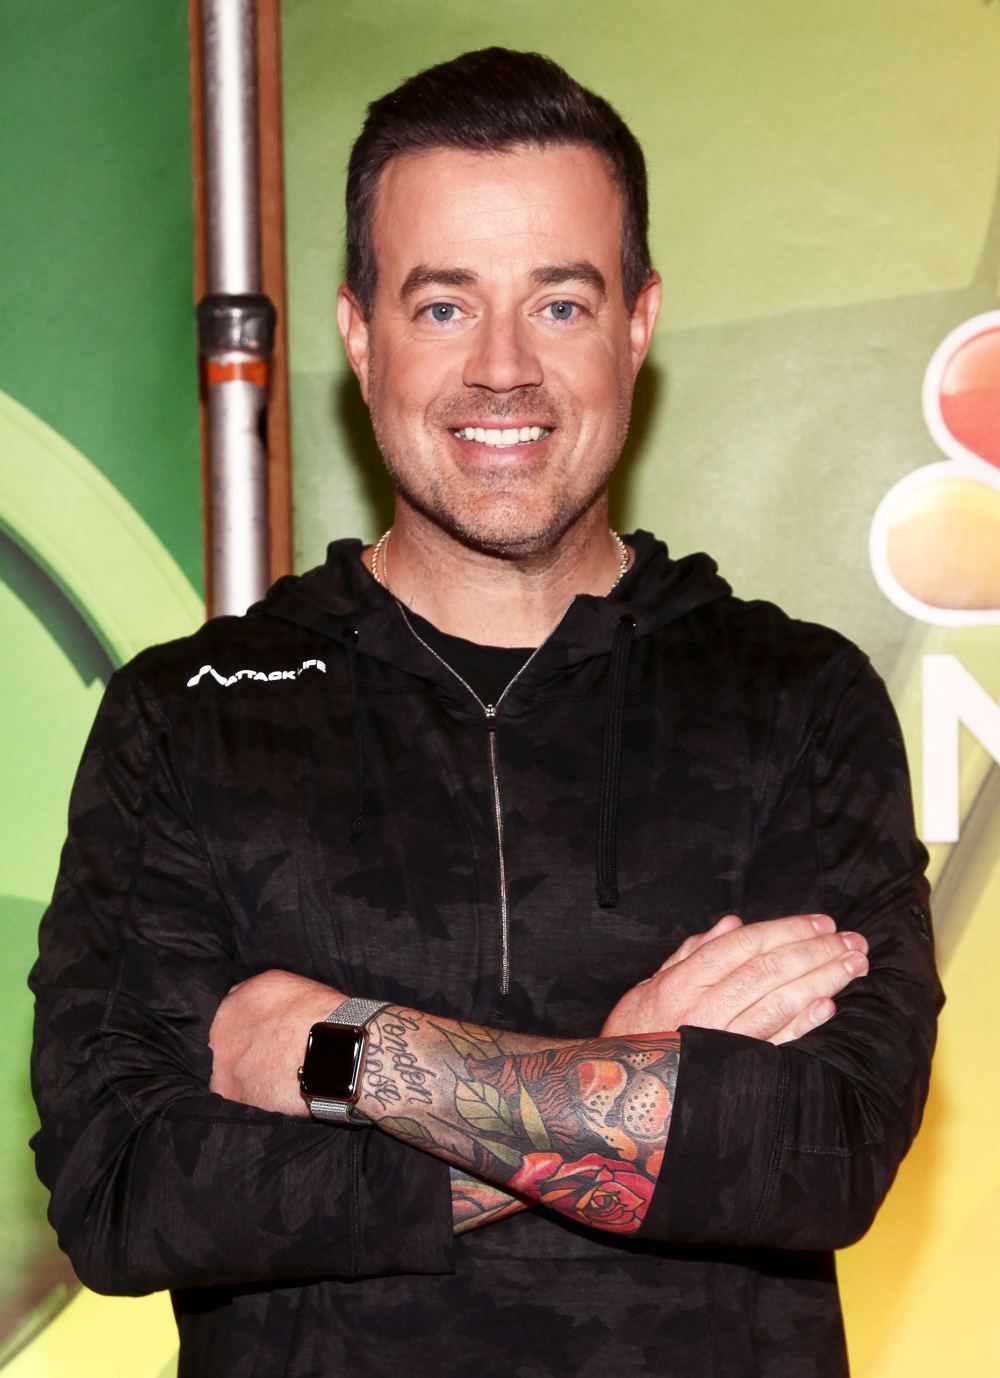 Watch Carson Daly Cut His Own Hair Live on the 'Today' Show